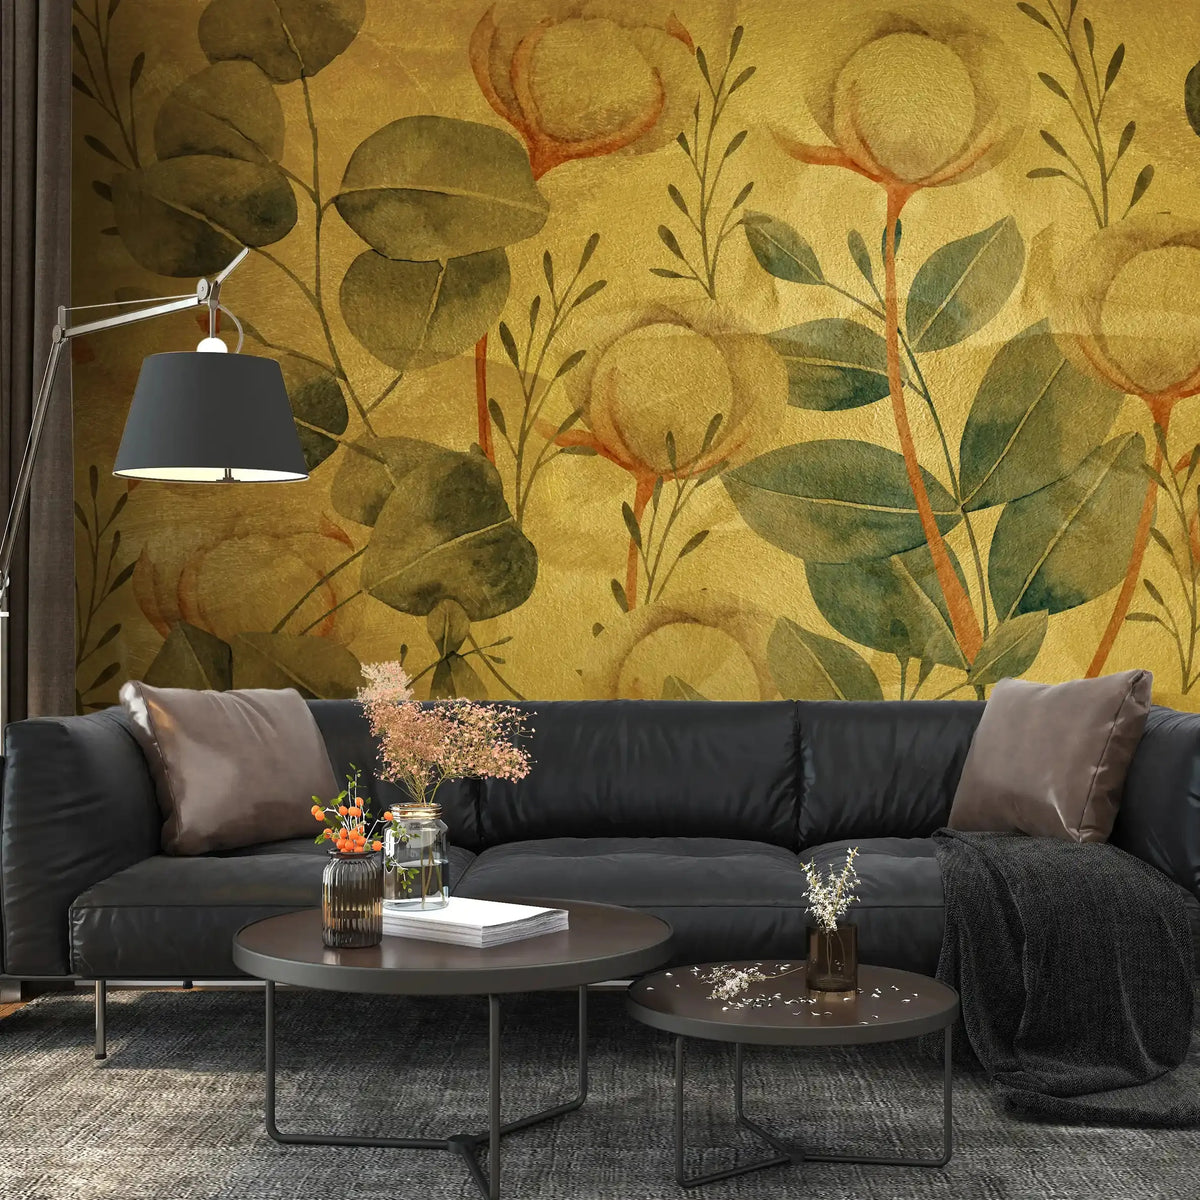 3035-C / Floral Wall Decor: Peelable, Stickable Wallpaper with Tulips Design on Gold Background, Ideal for Room Decor - Artevella